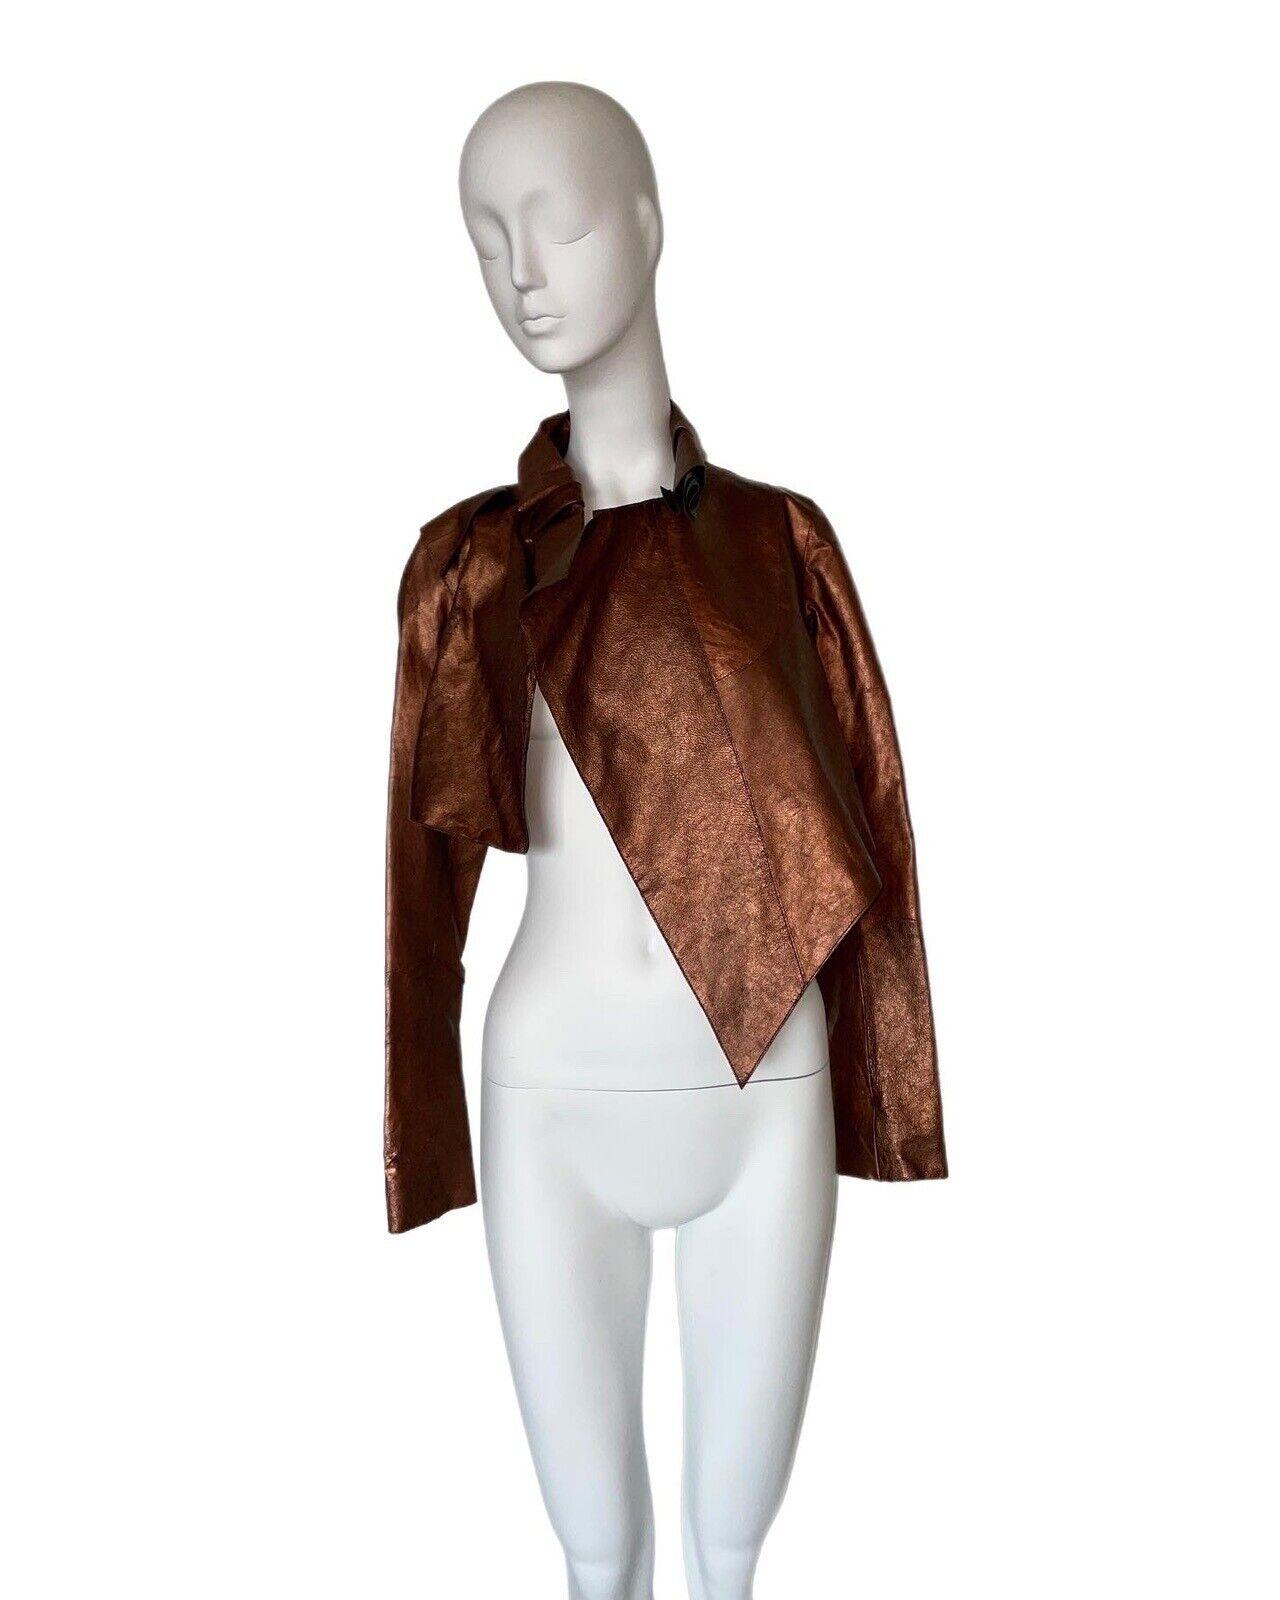 Helmut Lang
AW04
Vintage, Runway
Copper Bronze
NWT’s no flaws
100% Leather
IT40 fits true to size
No stretch
 Notes: avant-garde, collector's item

ALL SALES FINAL NO RETURNS NO EXCEPTIONS